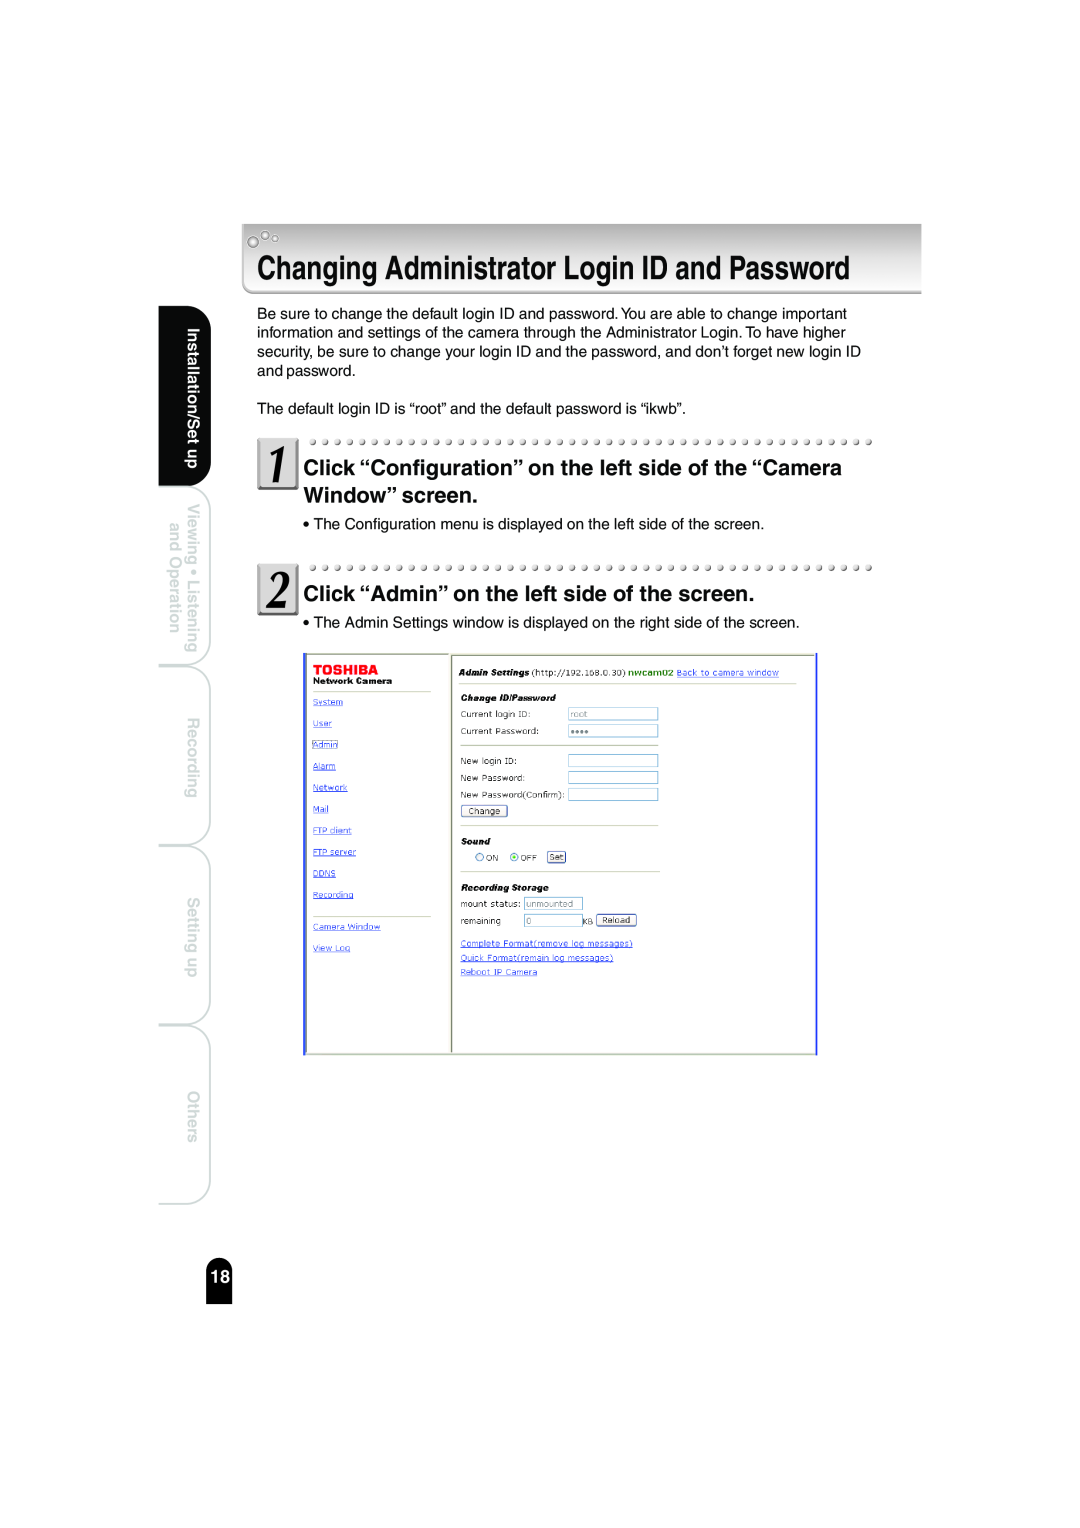 Toshiba IK-WB02A manual Changing Administrator Login ID and Password, Click “Admin” on the left side of the screen 